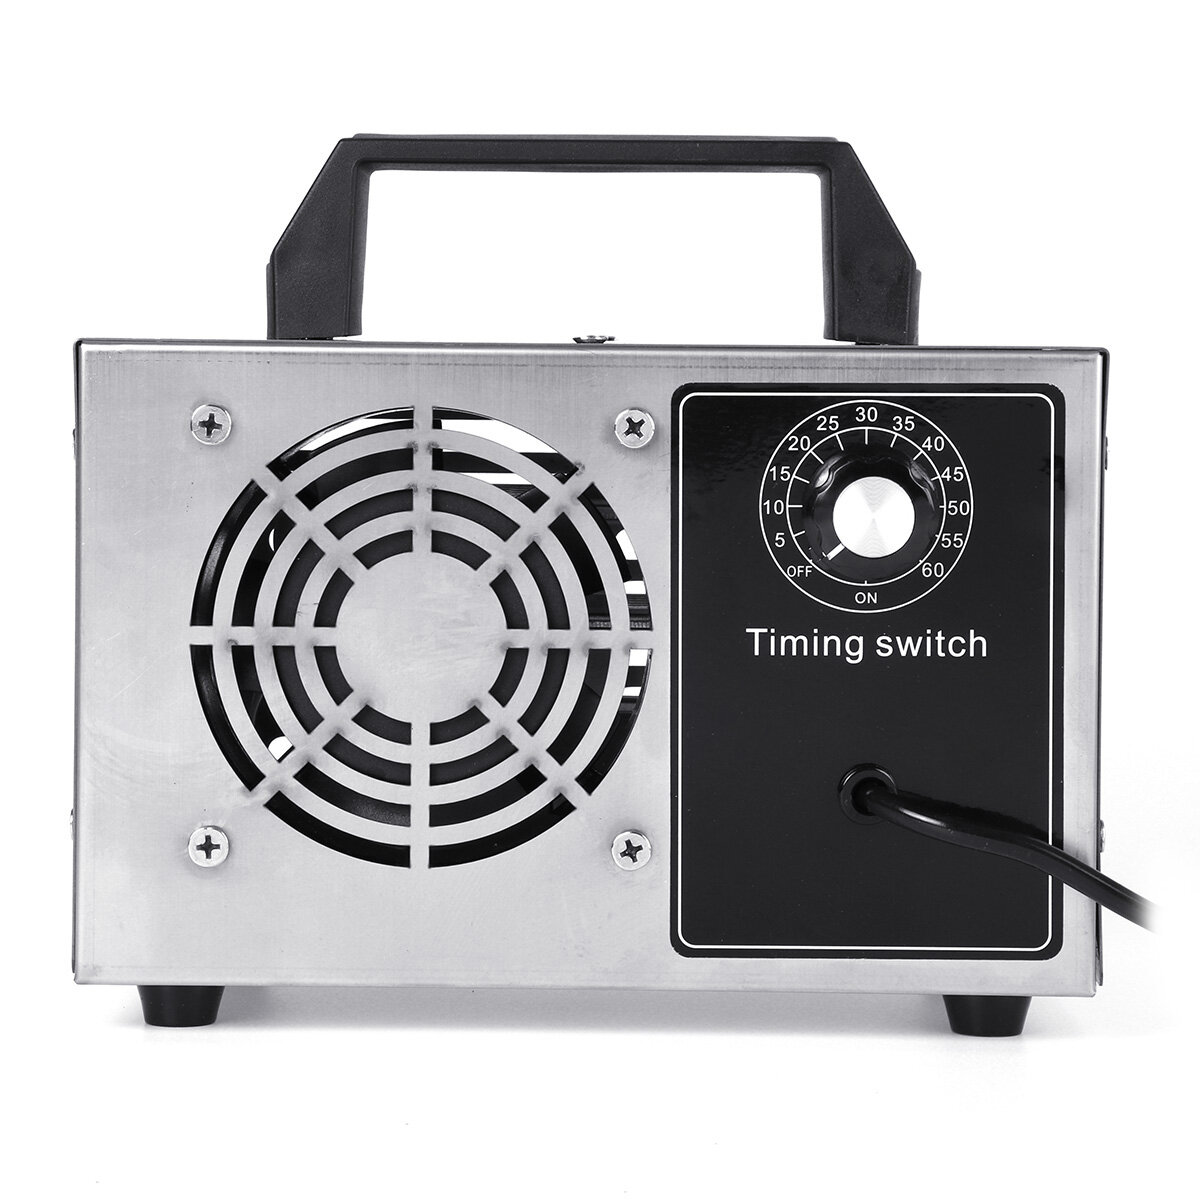 220V Ozone Generator Commercial Long Life Timing Purifier Air Cleaner Deodorizer